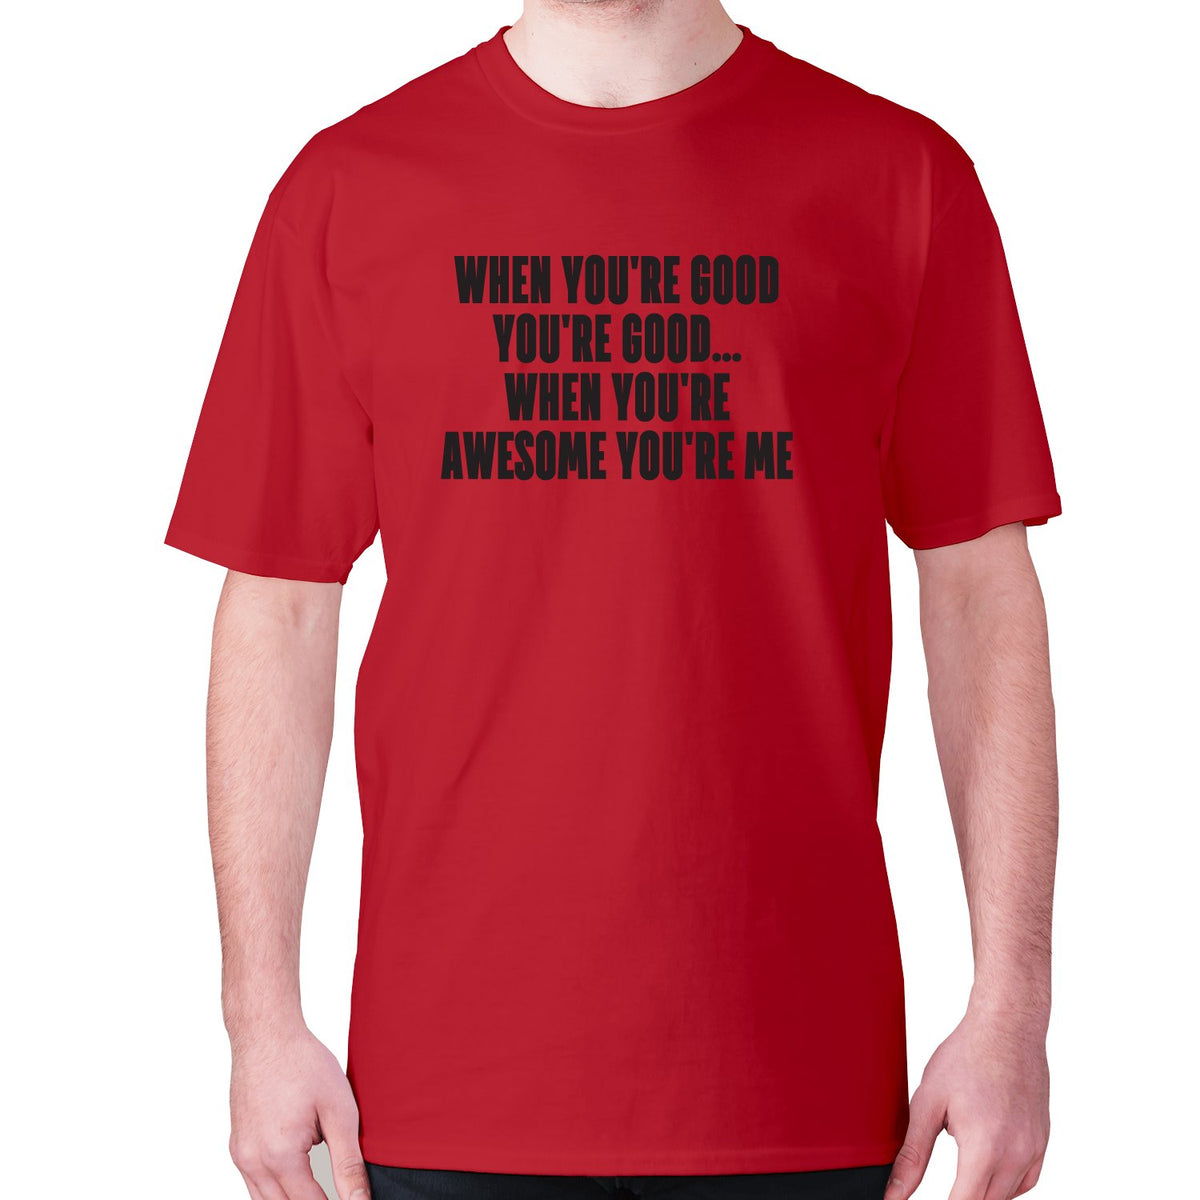 Funny slogan T shirts | Funny T shirts for men | When you're good you ...